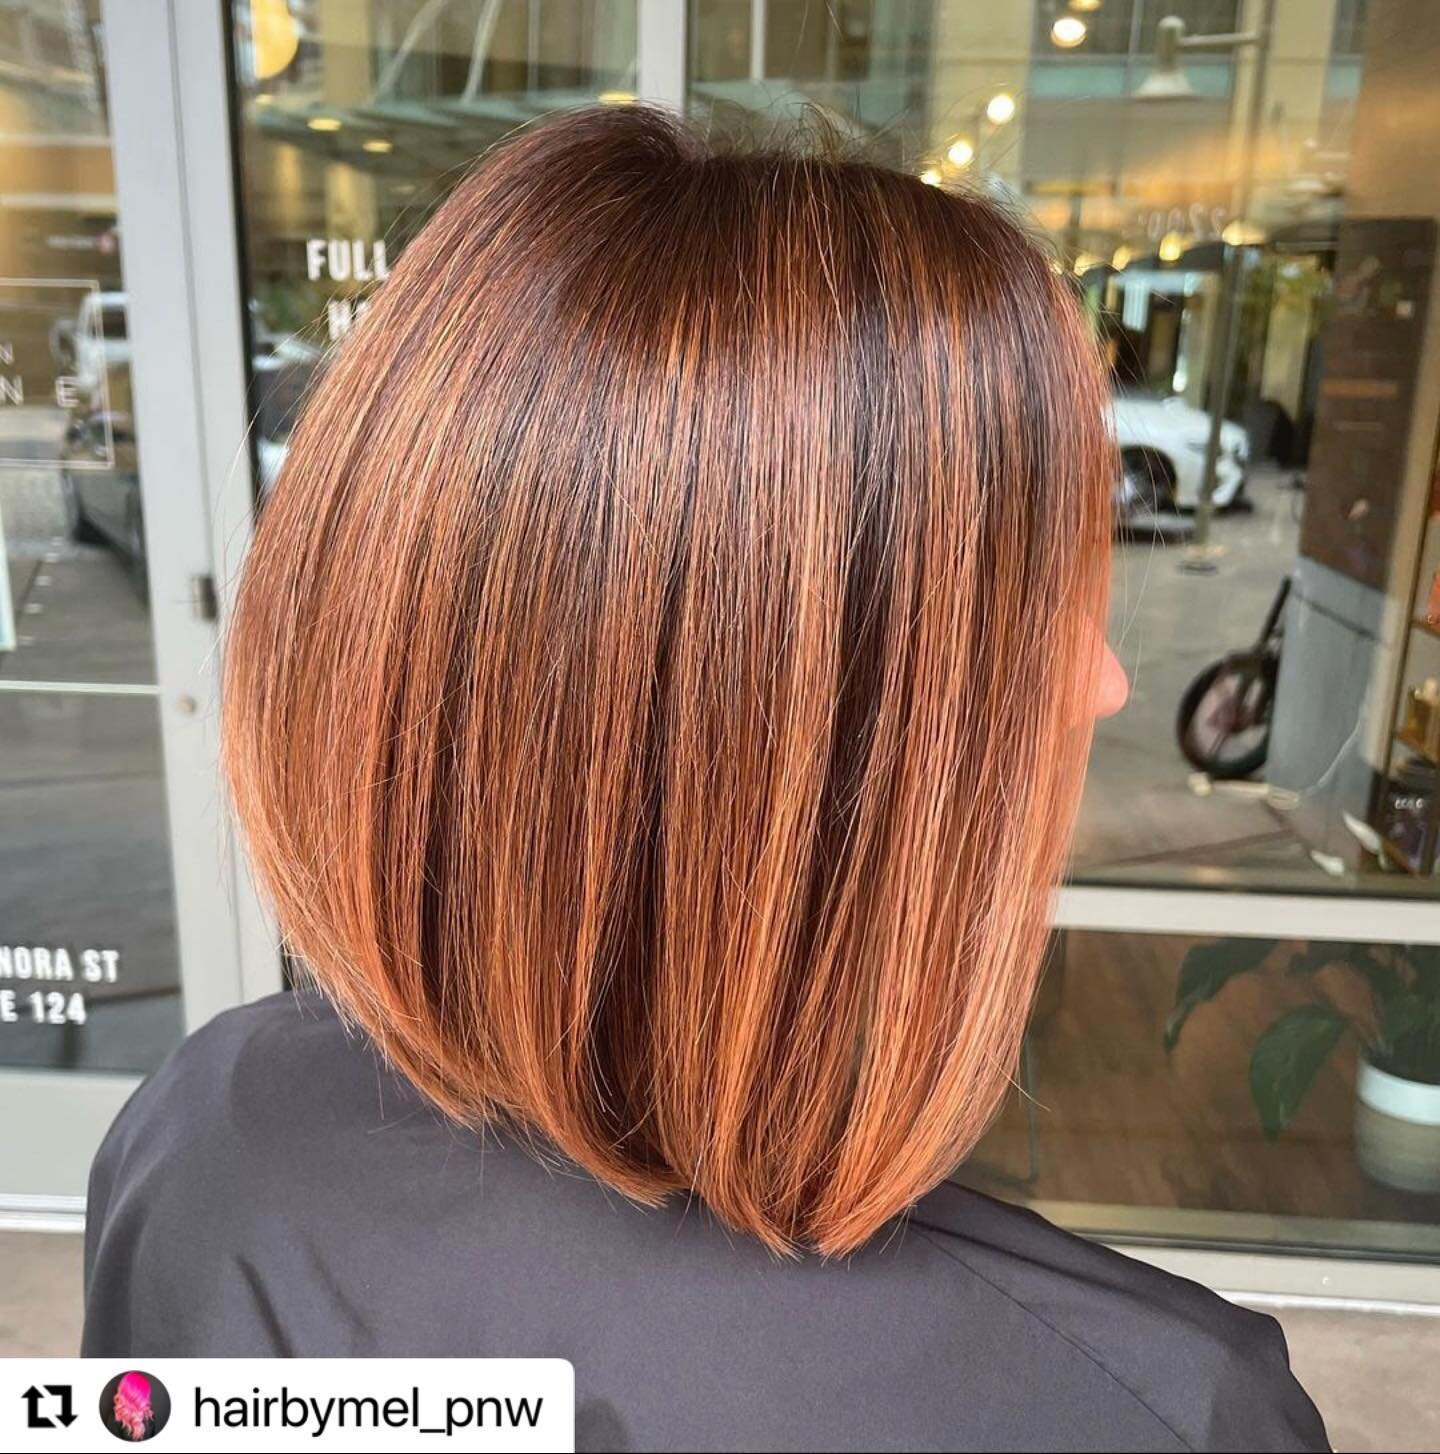 #Repost @hairbymel_pnw with @use.repost @salon_refine 
・・・
#rosegold dimensional color for this beautiful bride to be. This seamless transition was created using a freehand painting technique. #balayage is my jam! No lines of demarcation here! Only s